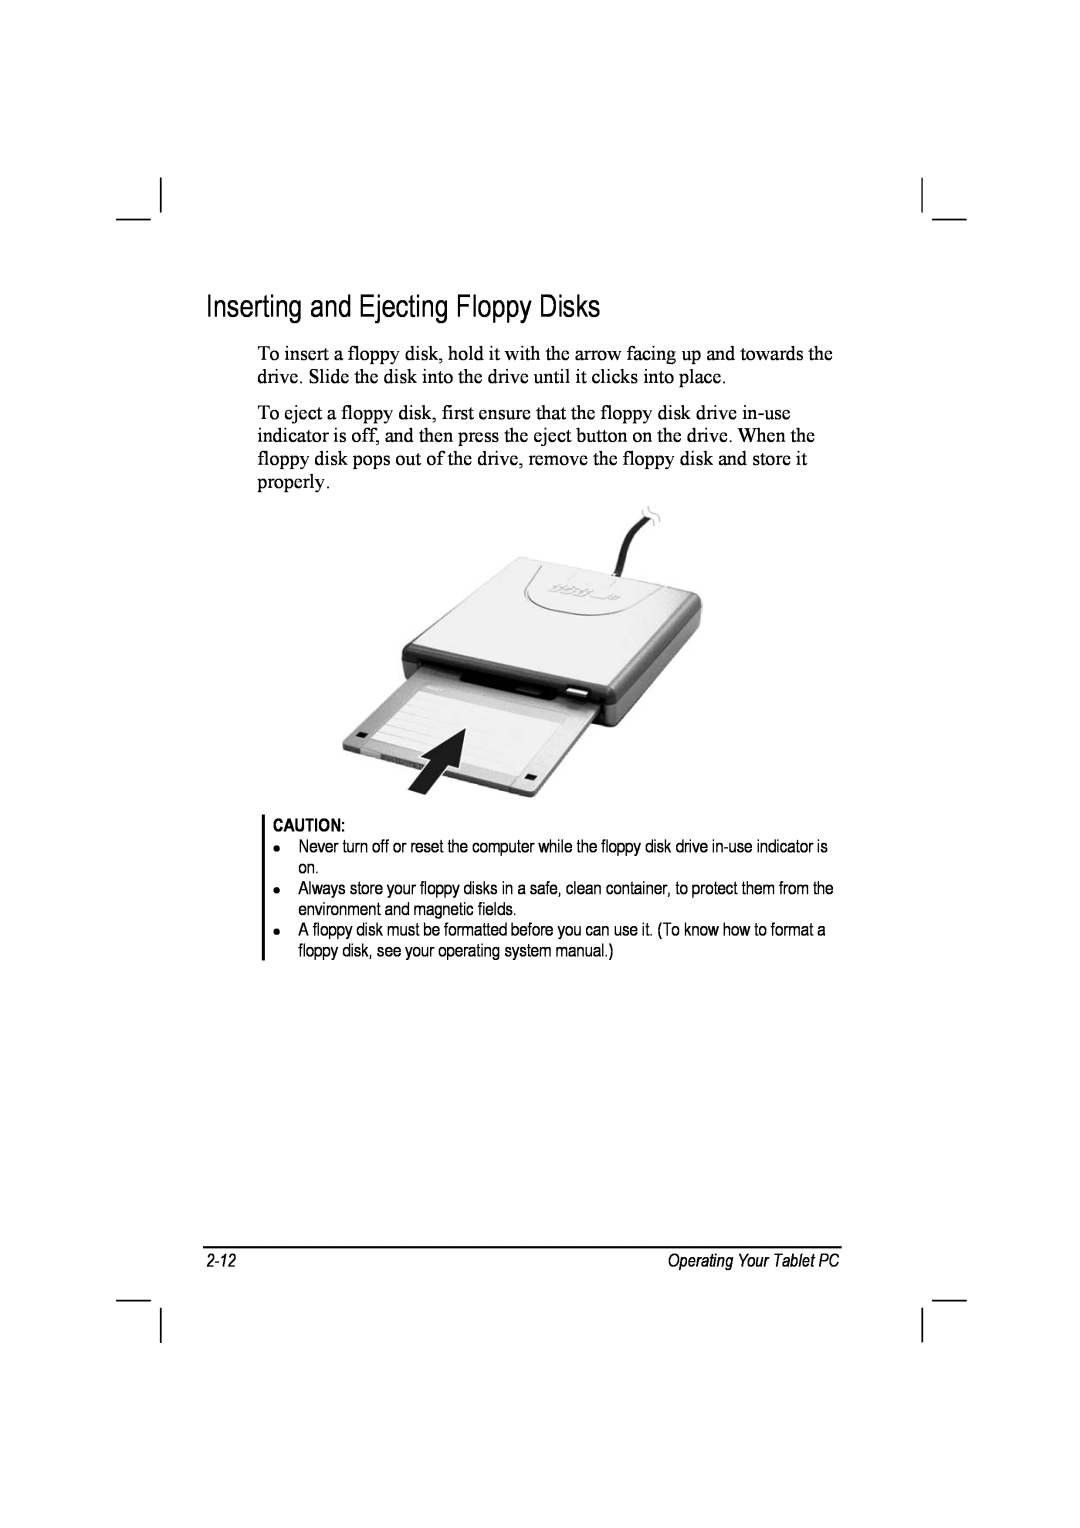 TAG 10 manual Inserting and Ejecting Floppy Disks 